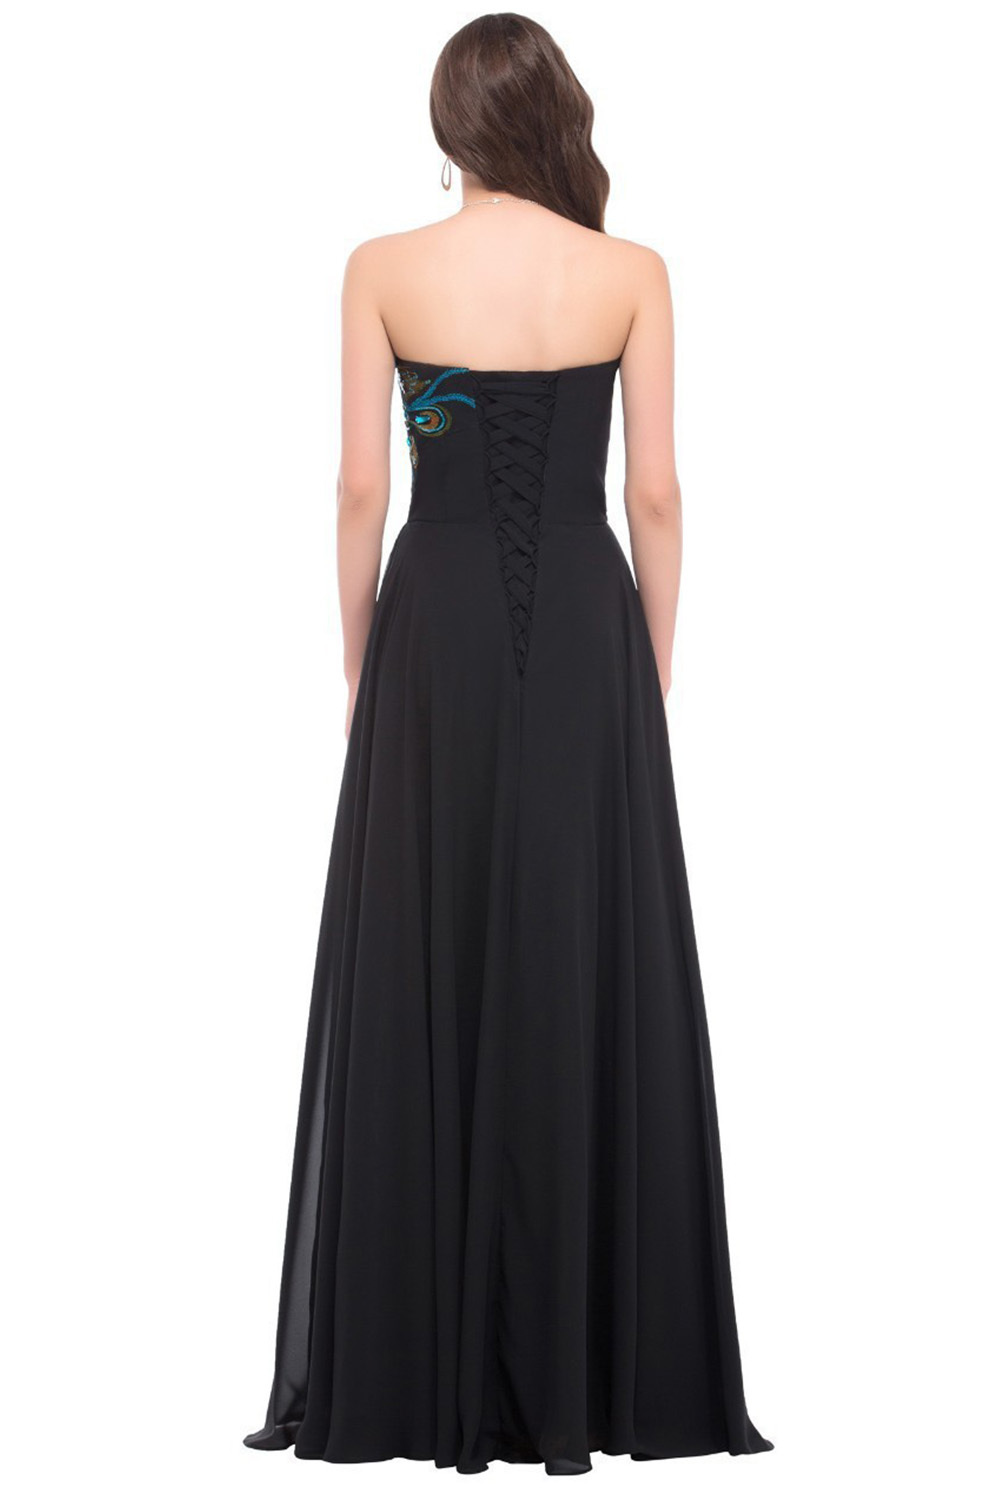 Prom Royal Blue Embroidery Peacock Strapless Maxi Dress